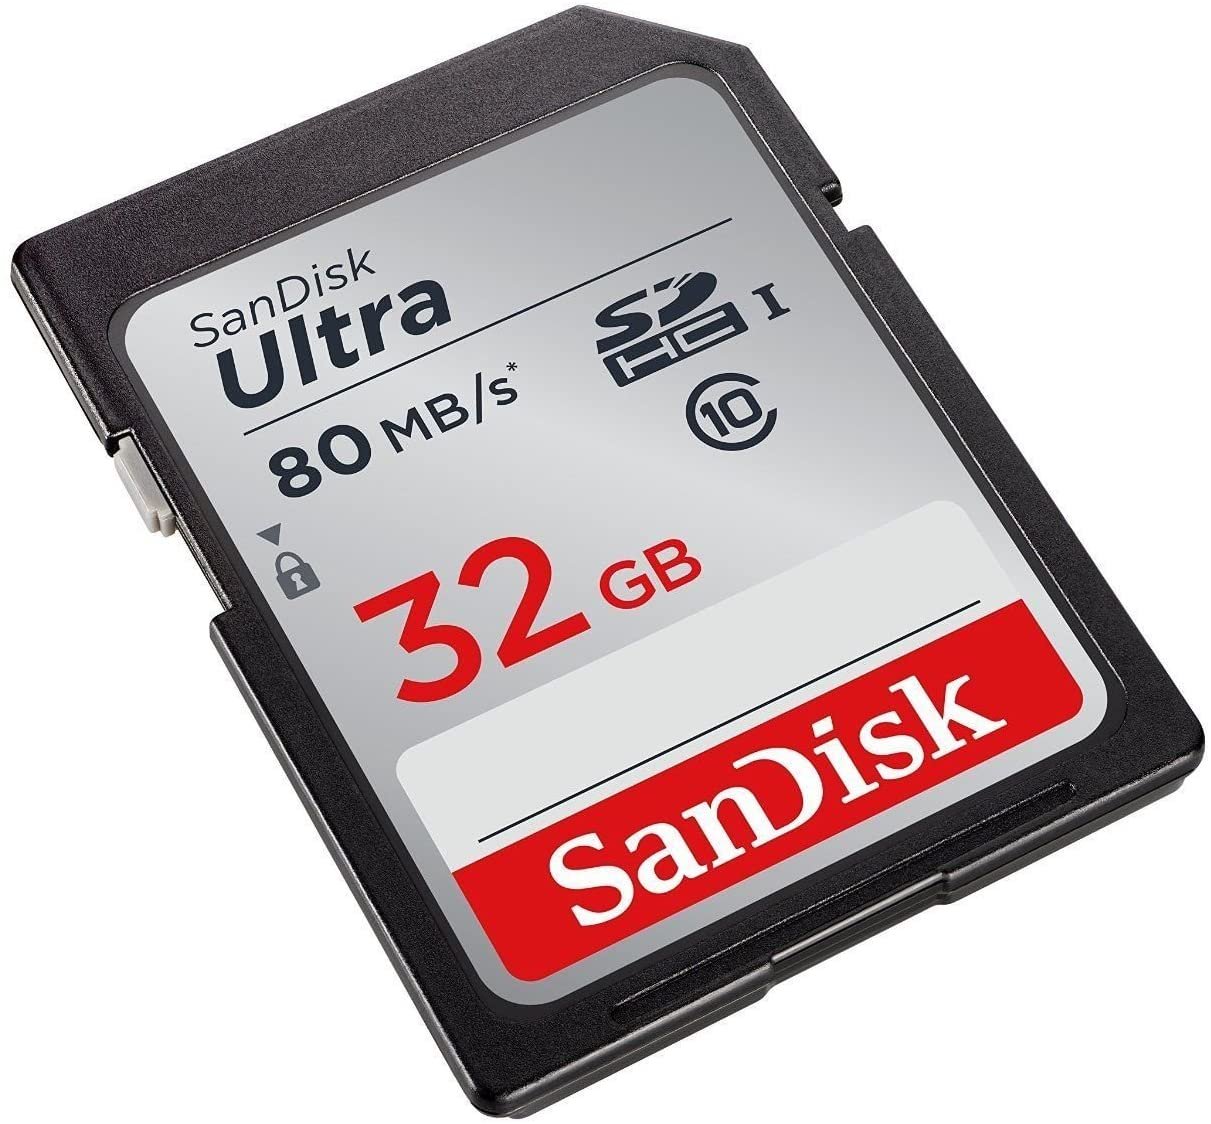 SanDisk Ultra 32GB Class 10 SDHC UHS-I Memory Card up to 80MB/s (SDSDUNC-032G-GN6IN) - image 2 of 3